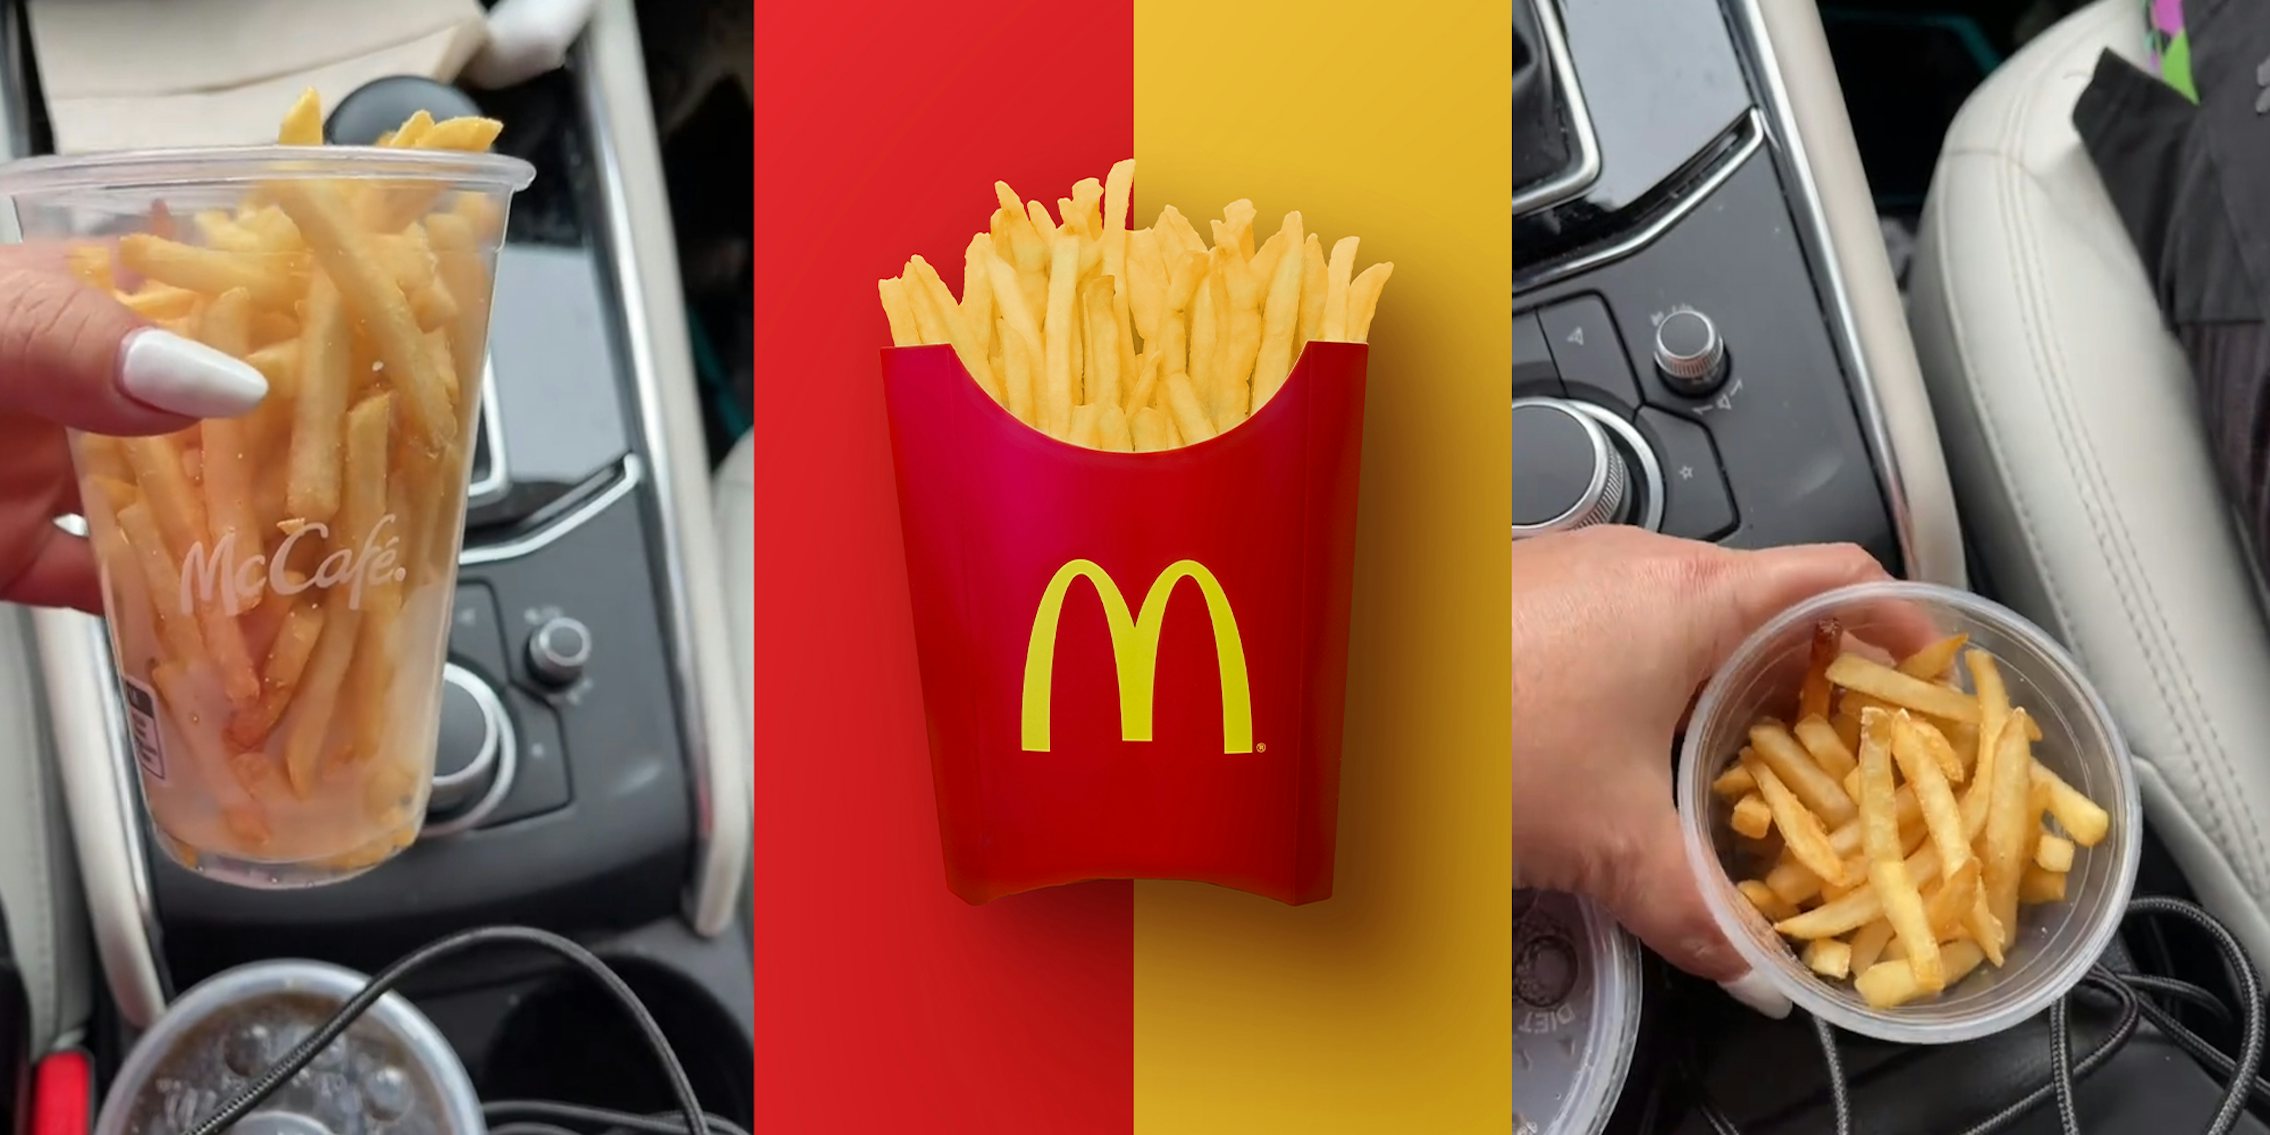 McDonald's fries cup holder